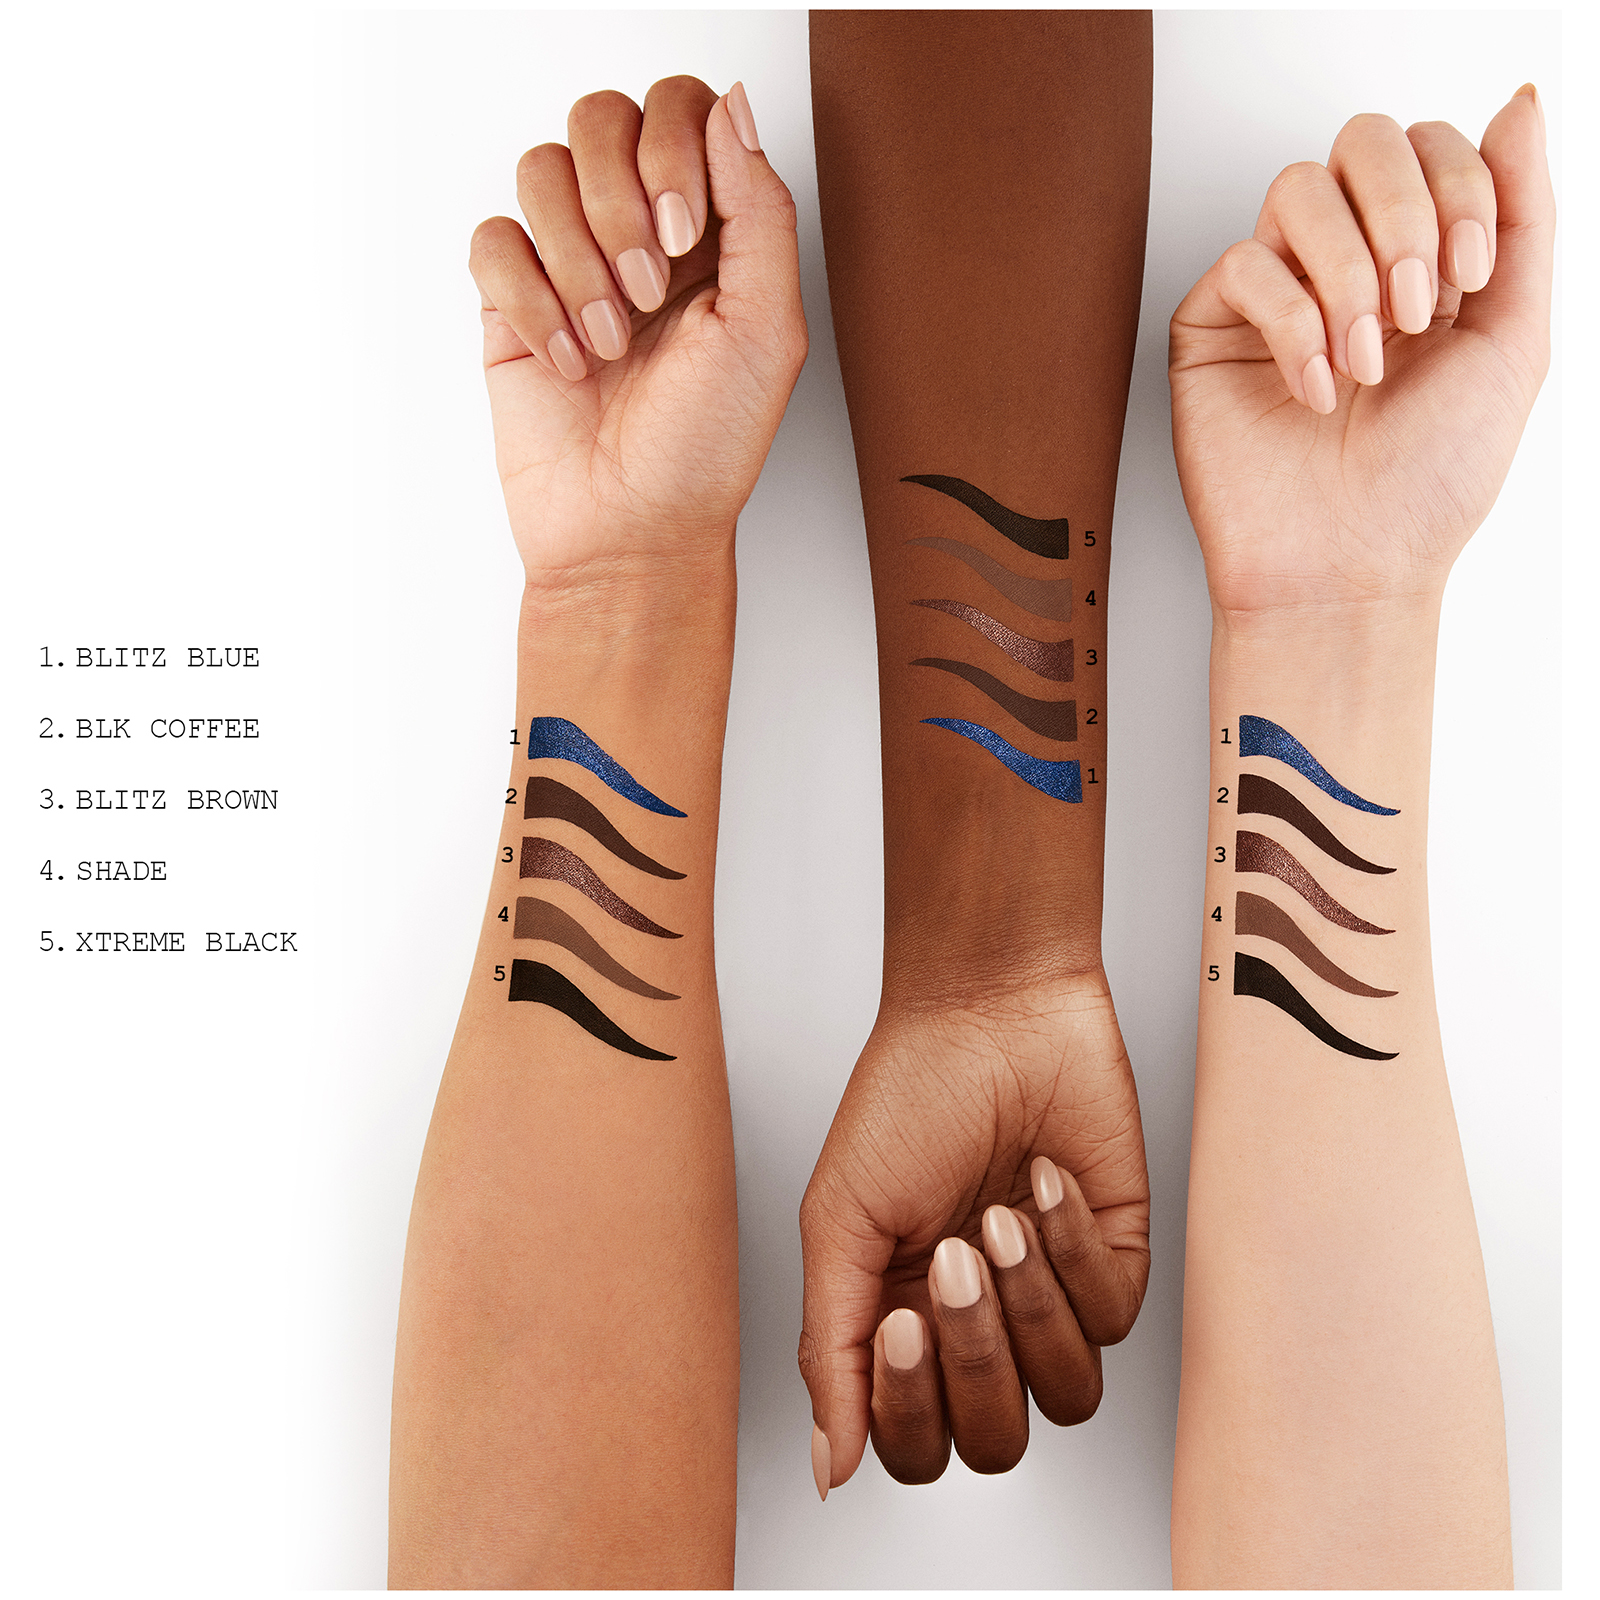 Image showing swatches of the shades across three different skin tones: Blitz Blue, BLK Coffee, Blitz Brown, Shade, Xtreme Black